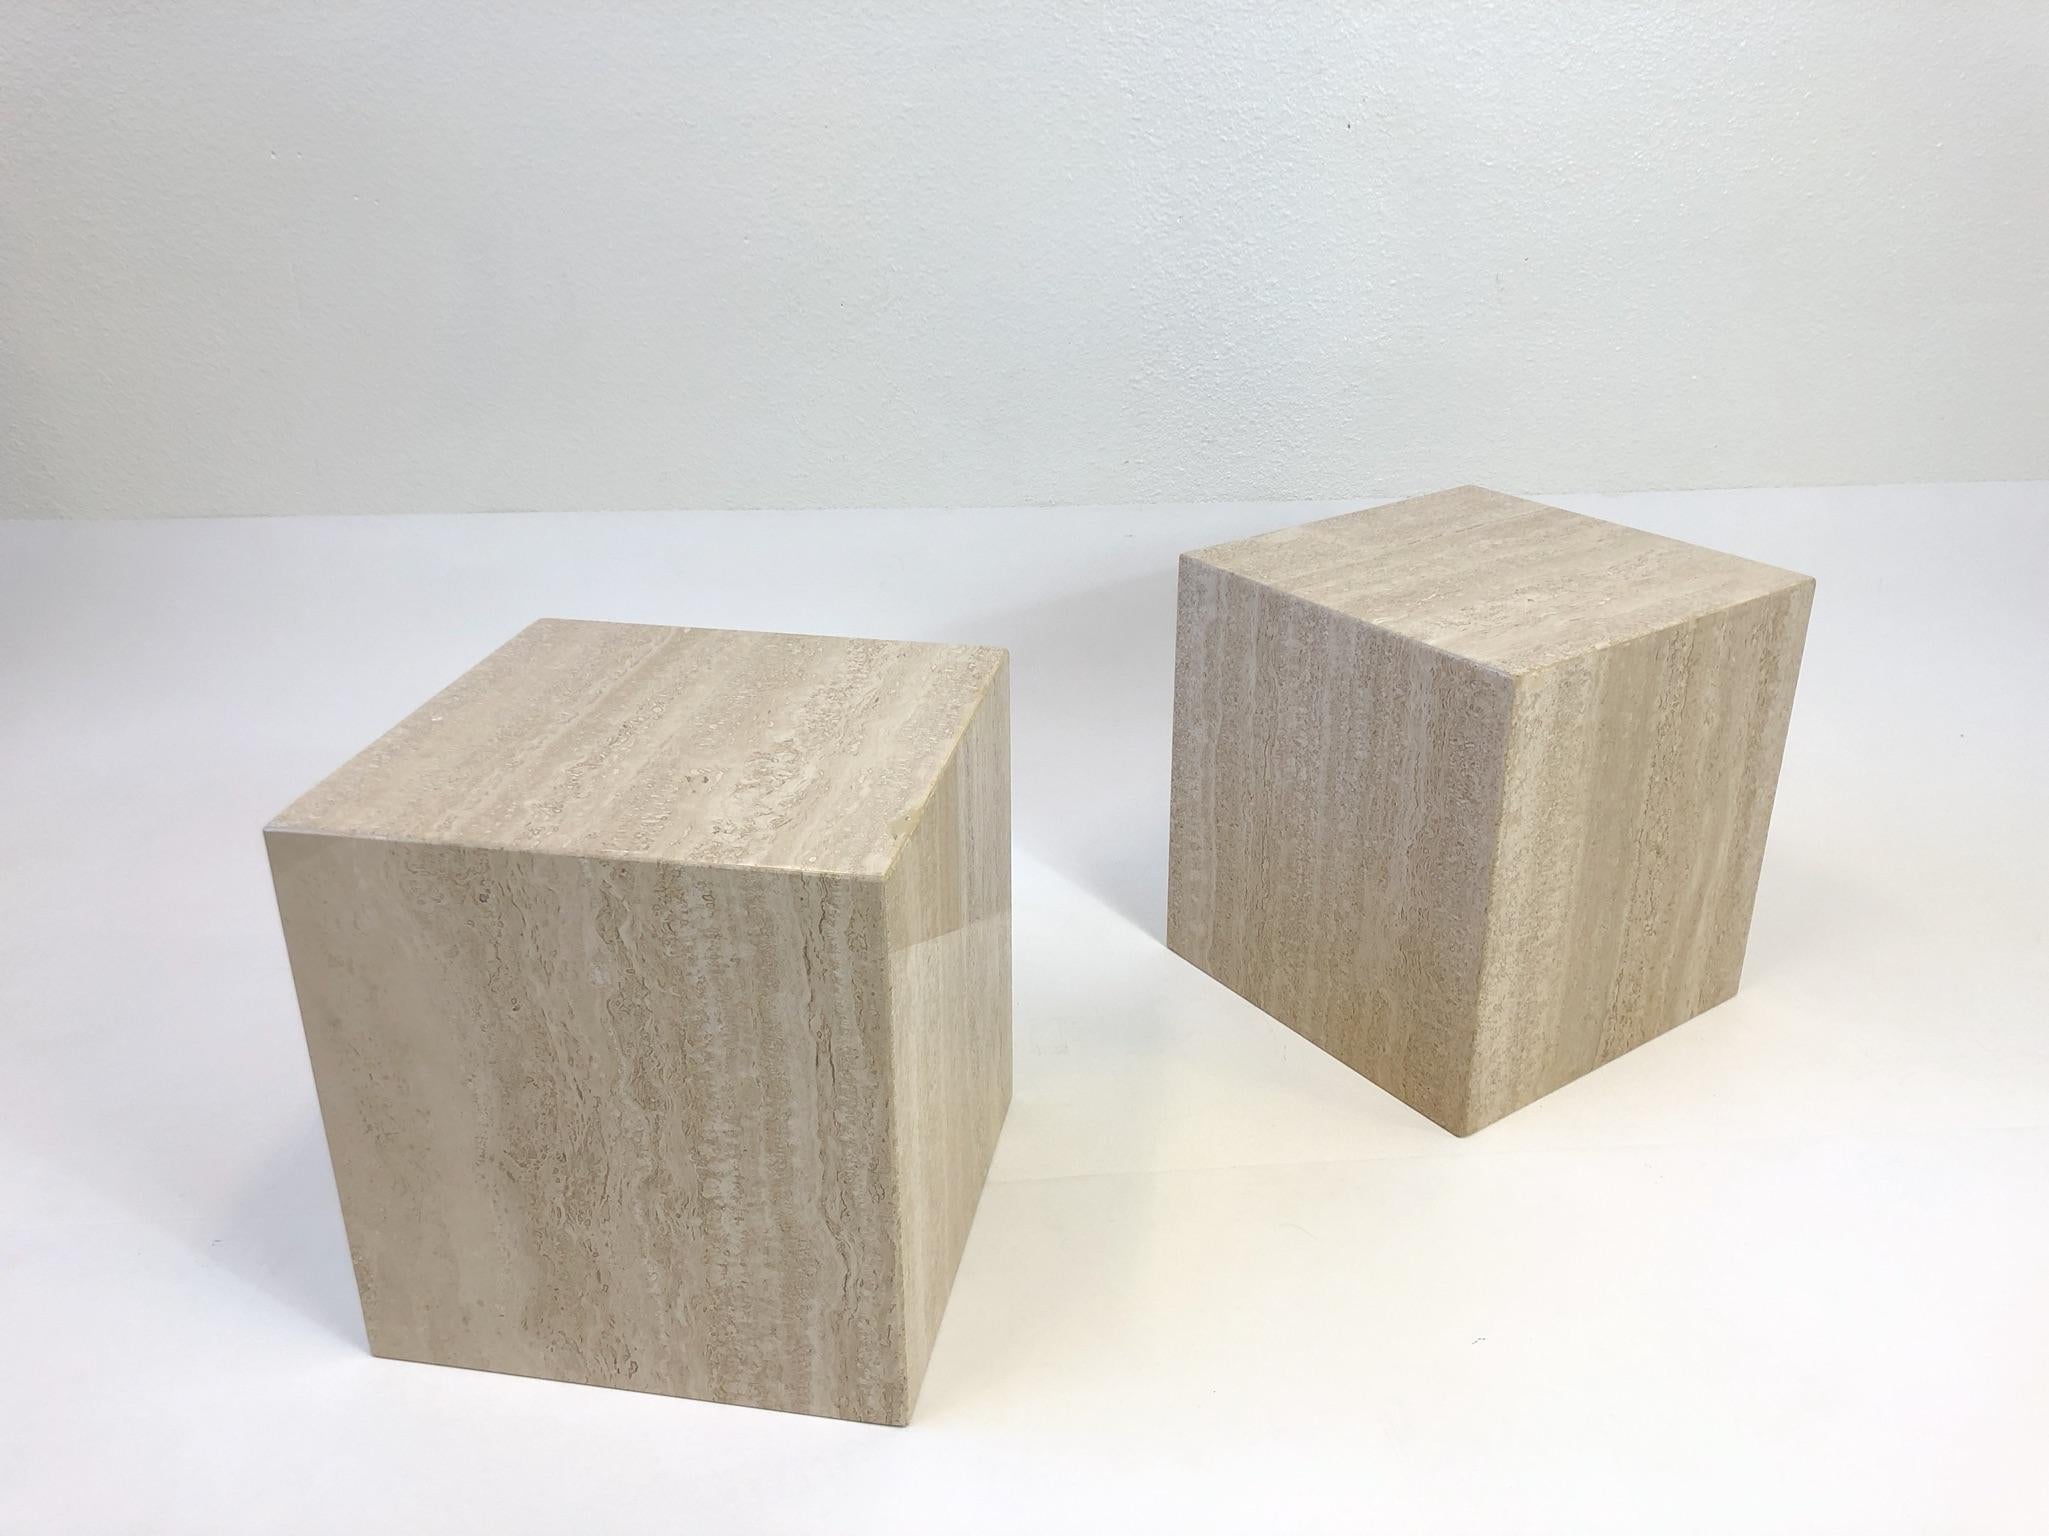 A beautiful pair of polish Italian travertine side tables from the 1970s. The tables have been newly professionally polished. If you want a dull matte finish we can do that.
Dimensions: 13.75” wide 13.75” deep 14.5” high.